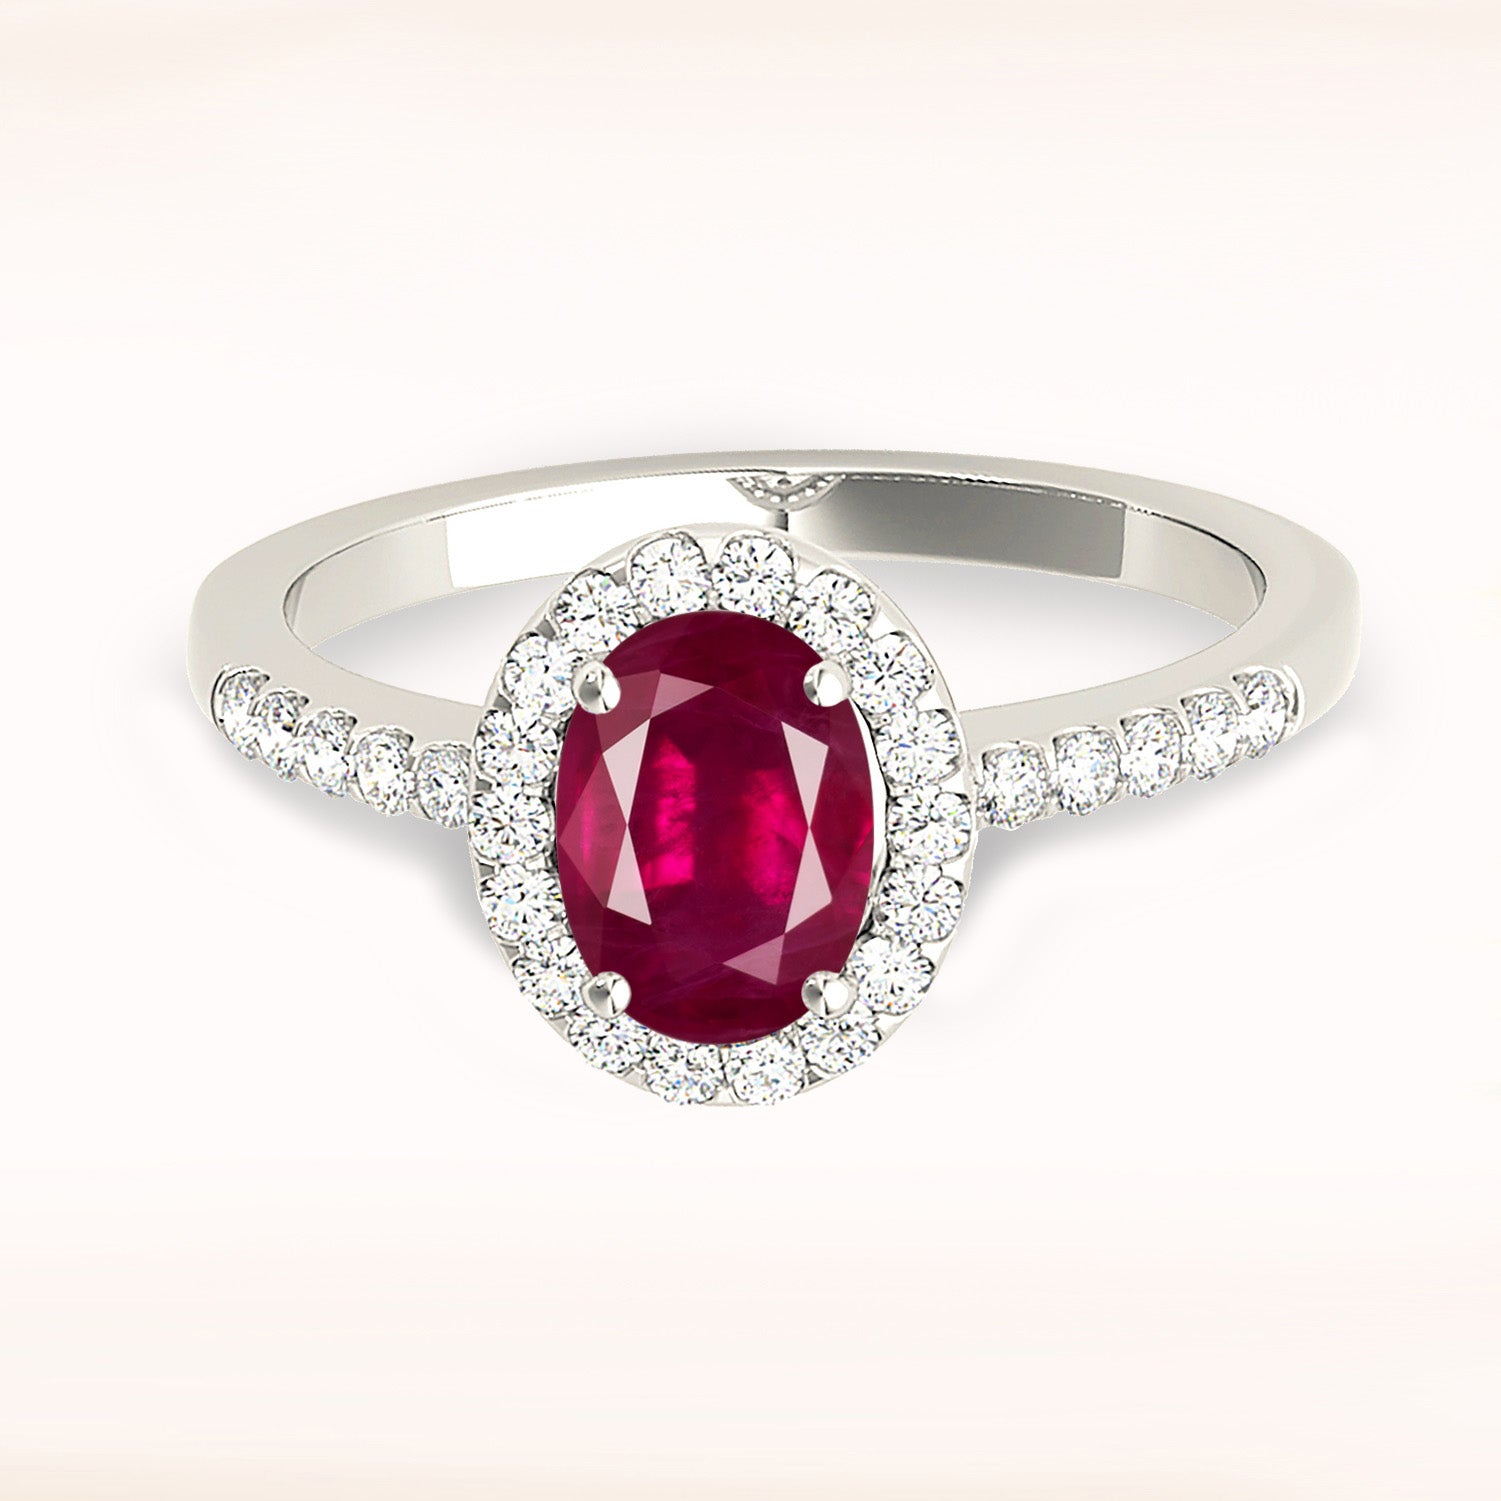 1.55 ct. Genuine Oval Ruby Ring With 0.25 ctw. Diamond Halo And Delicate Diamond band-in 14K/18K White, Yellow, Rose Gold and Platinum - Christmas Jewelry Gift -VIRABYANI